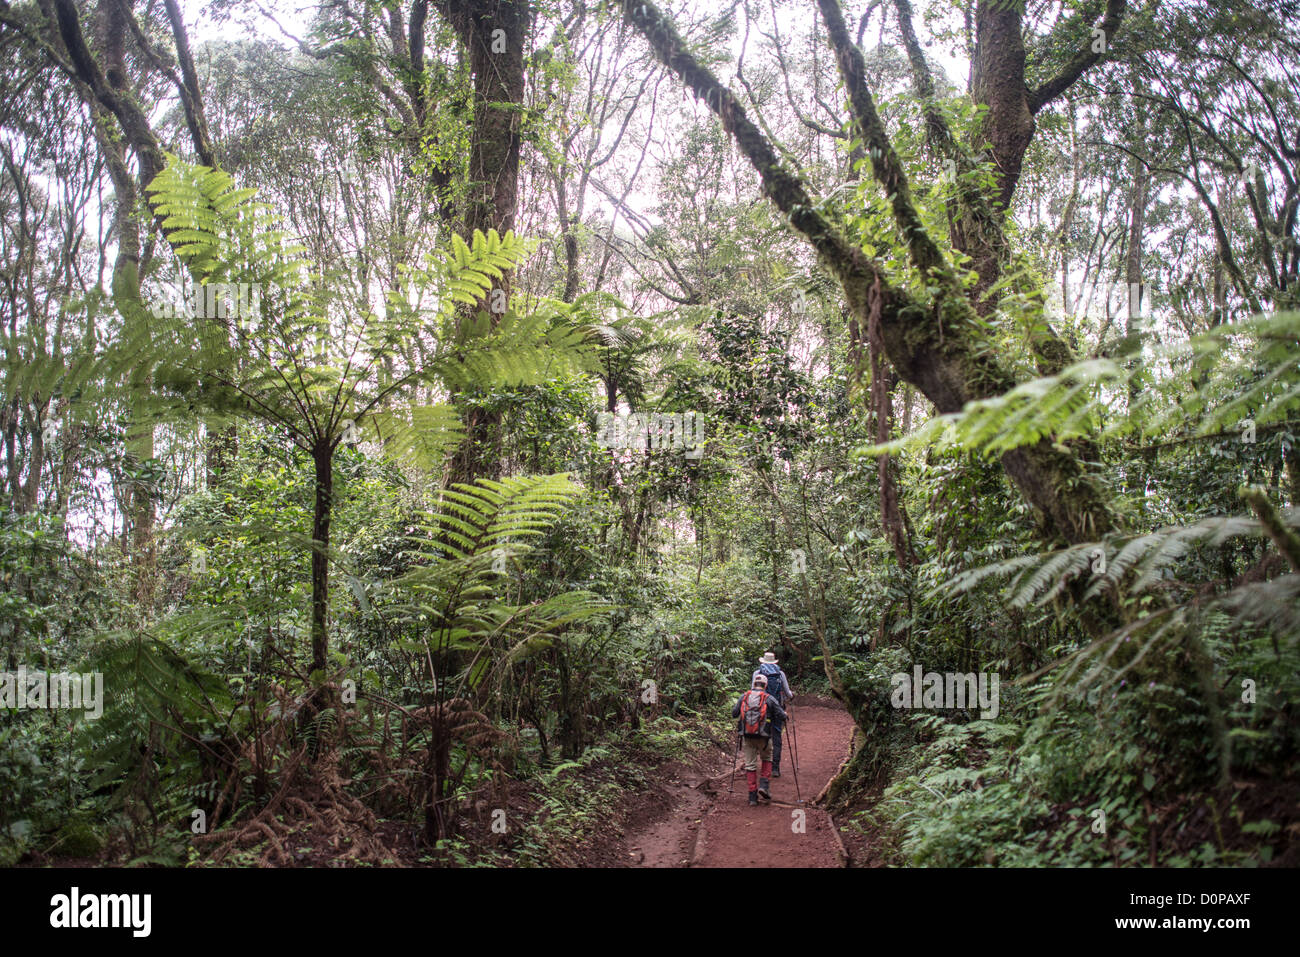 MT KILIMANJARO, Tanzania - A group of hikers on the steep trail descending through the forest from Mweka Camp to Mweka Gate at the end of an expedition climbing Mt Kilimanjaro. Stock Photo